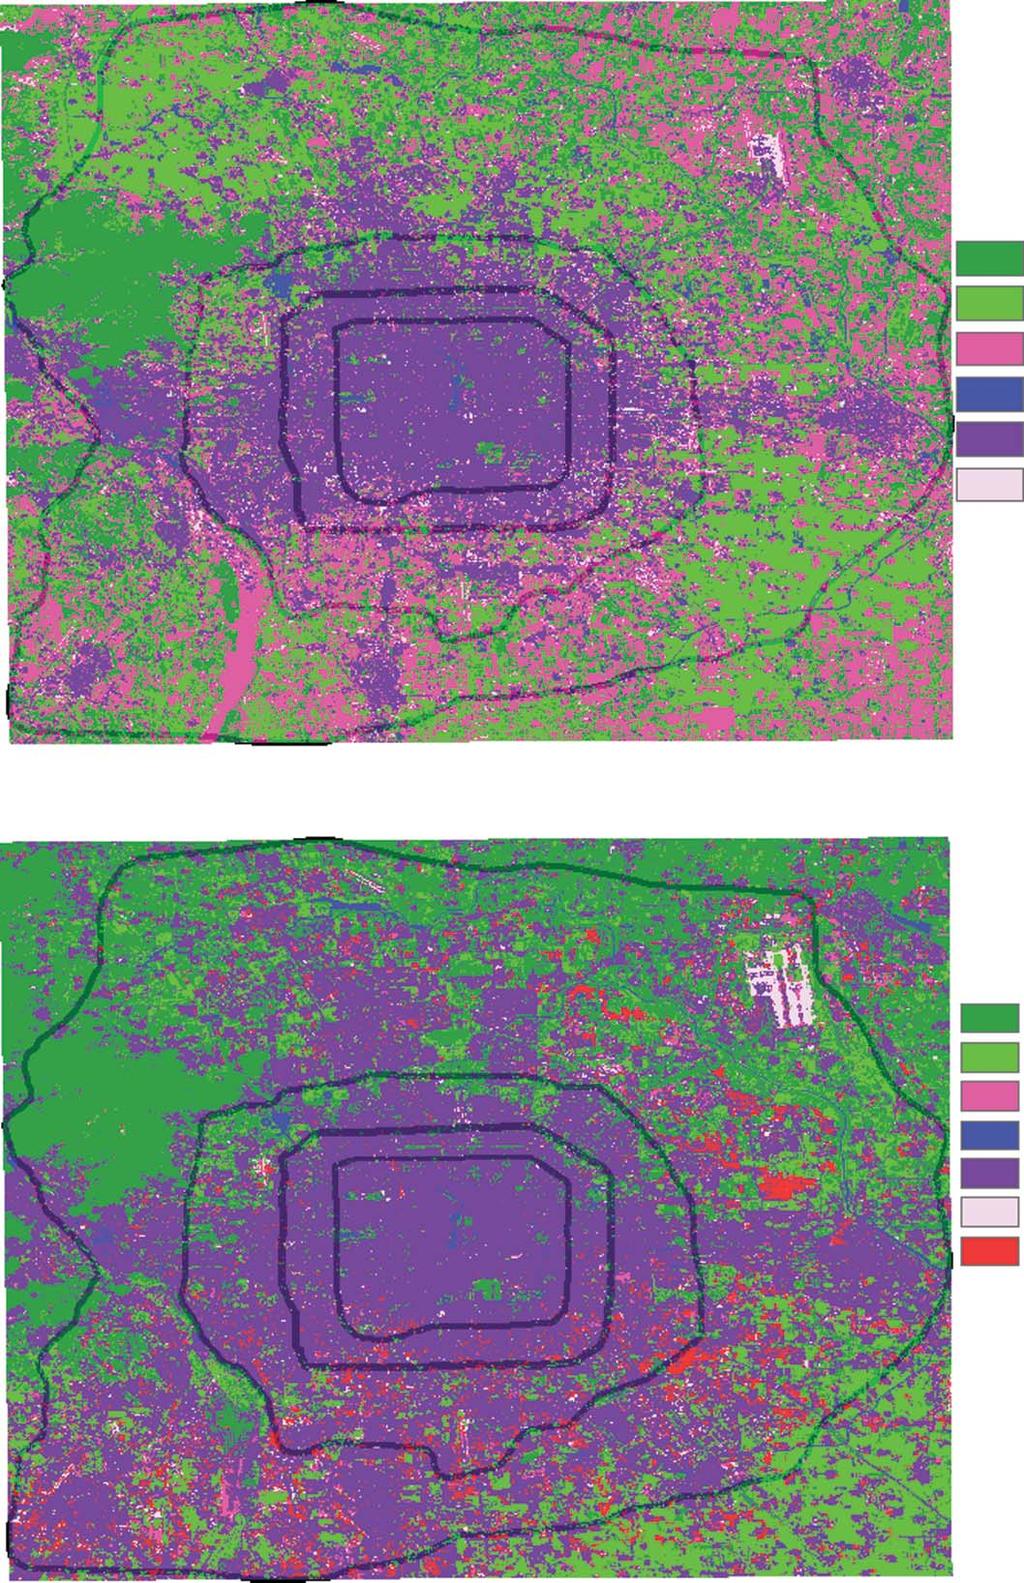 International Journal of Remote Sensing 5511 (a) LULC Trees Vegetation Soil Water Built-up Marble (b) Figure 3. LULC maps of study area. (a) 2 August 1999; (b) 8 August 2010. Table 4.